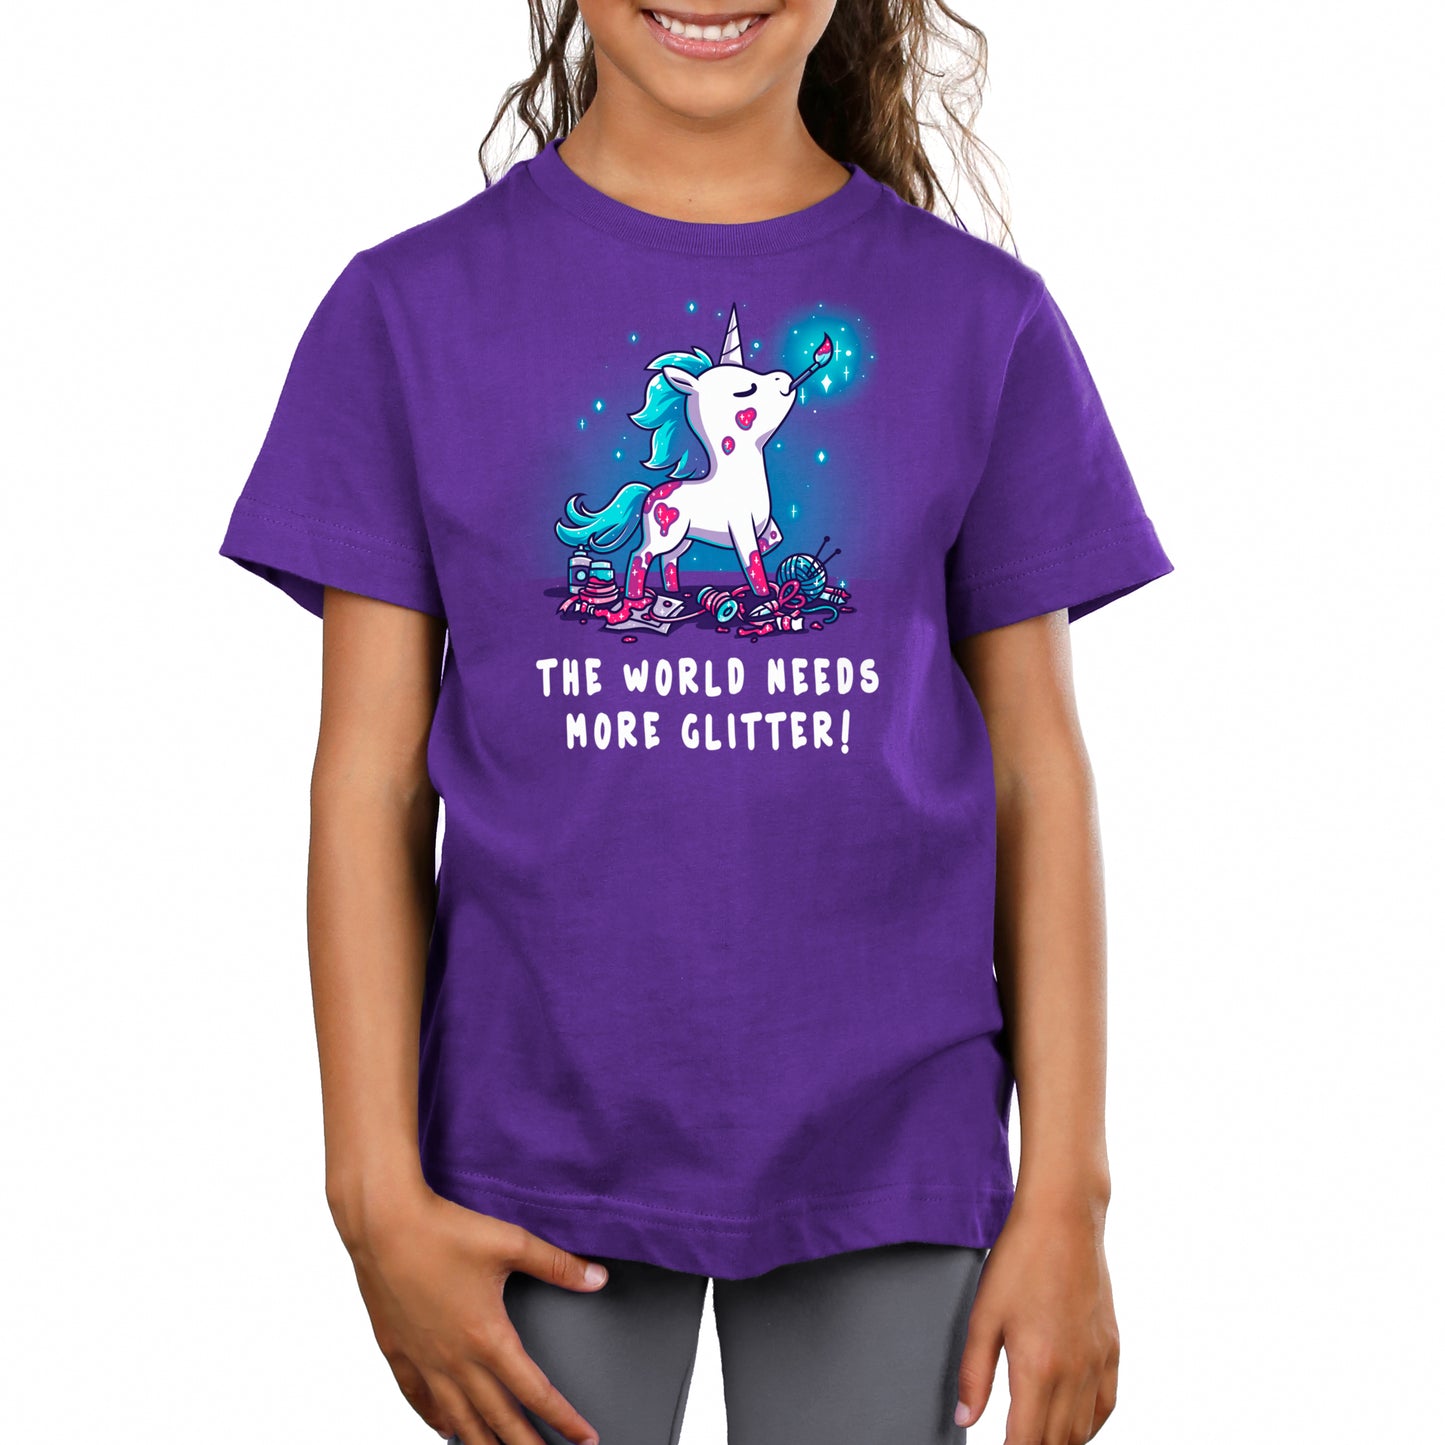 A girl wearing a glittery purple t-shirt promoting TeeTurtle's "The World Needs More Glitter" brand.